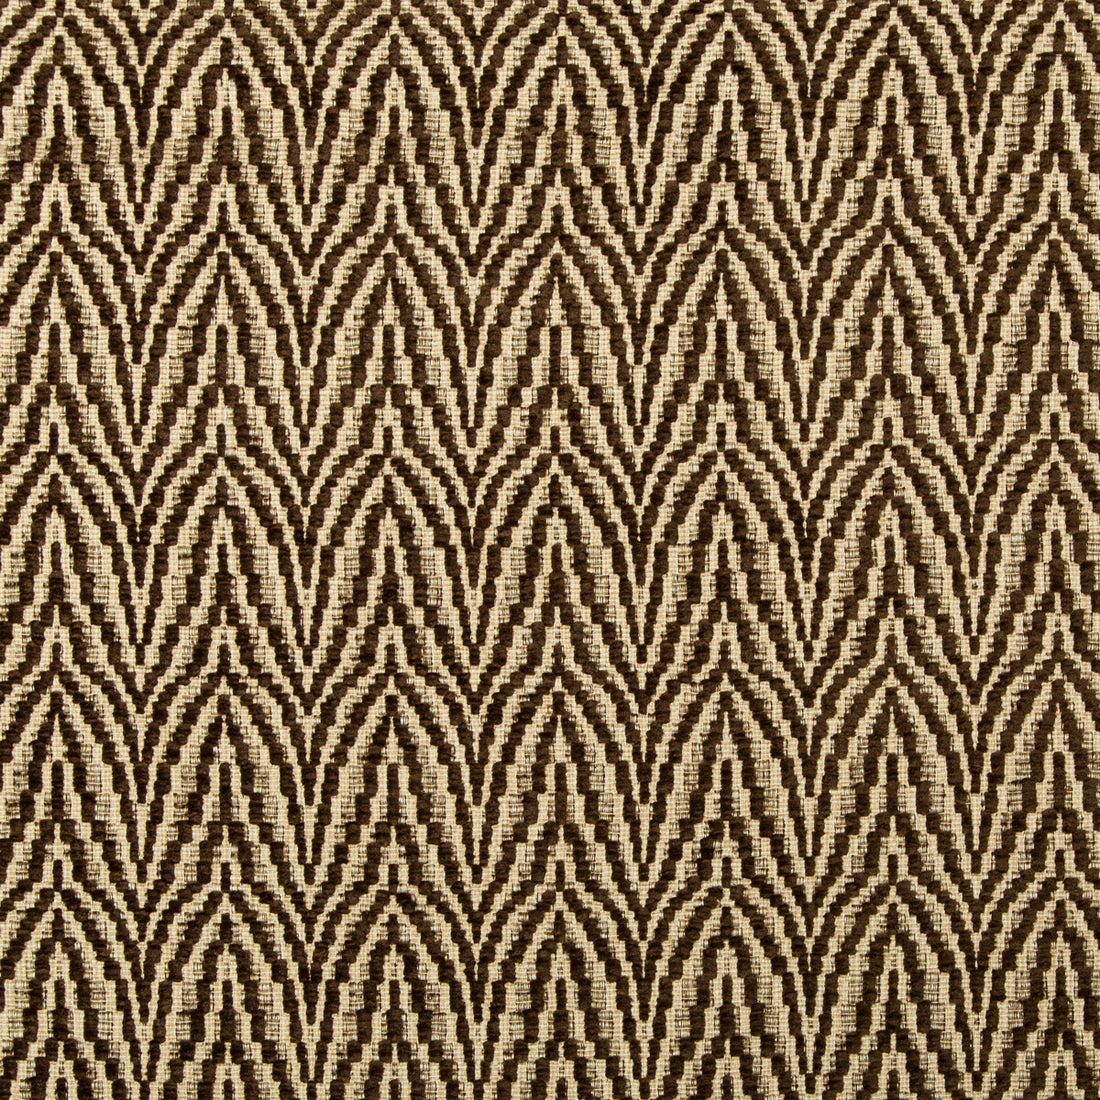 Blyth Weave fabric in umber color - pattern 2020108.6.0 - by Lee Jofa in the Linford Weaves collection